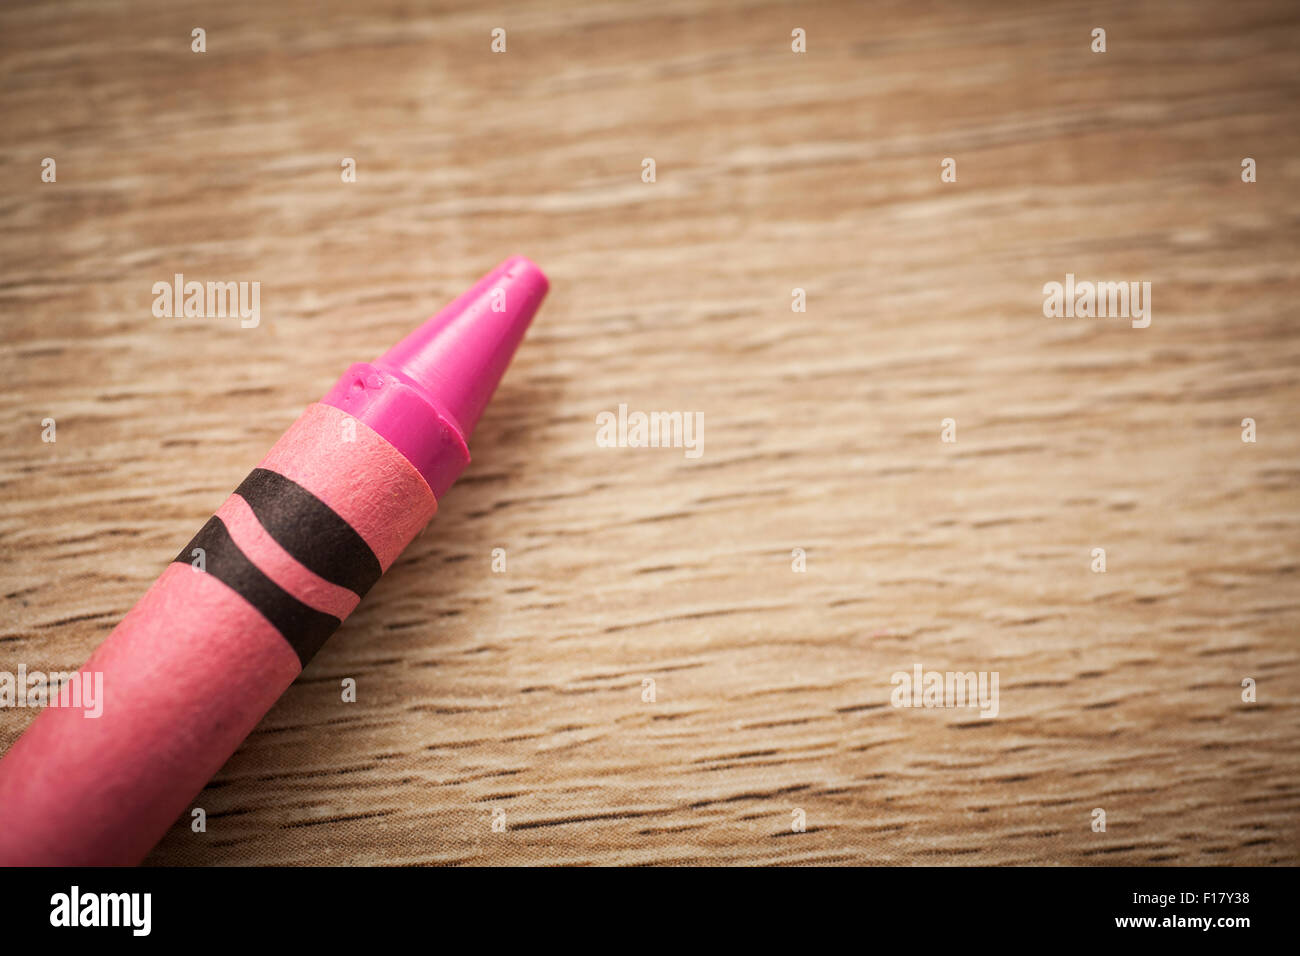 Pink wax crayon scribble background. Pink crayons texture Stock